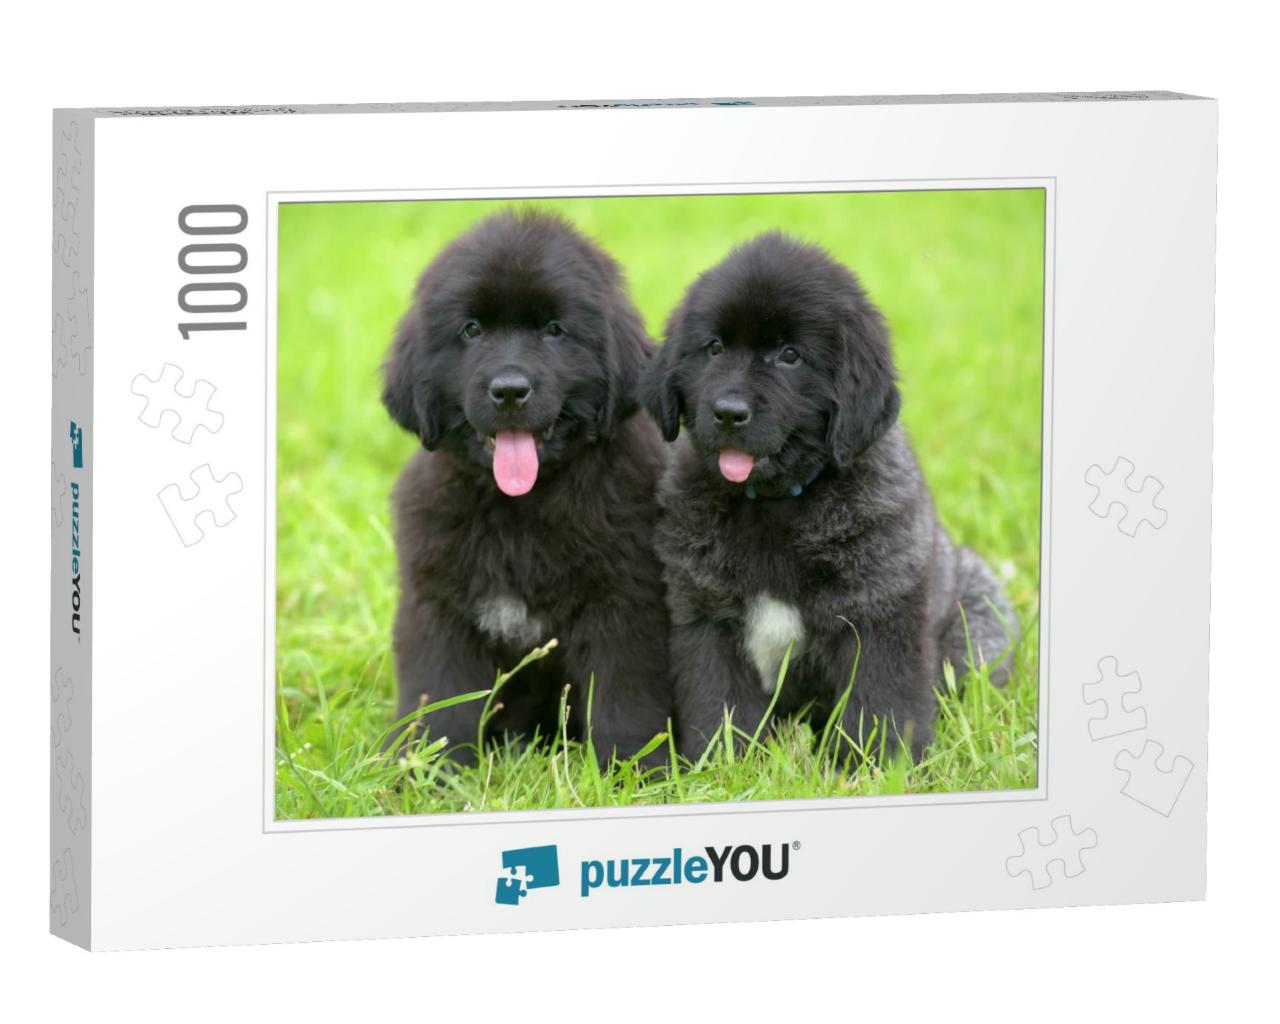 Two Small Black Puppies of Newfoundland... Jigsaw Puzzle with 1000 pieces